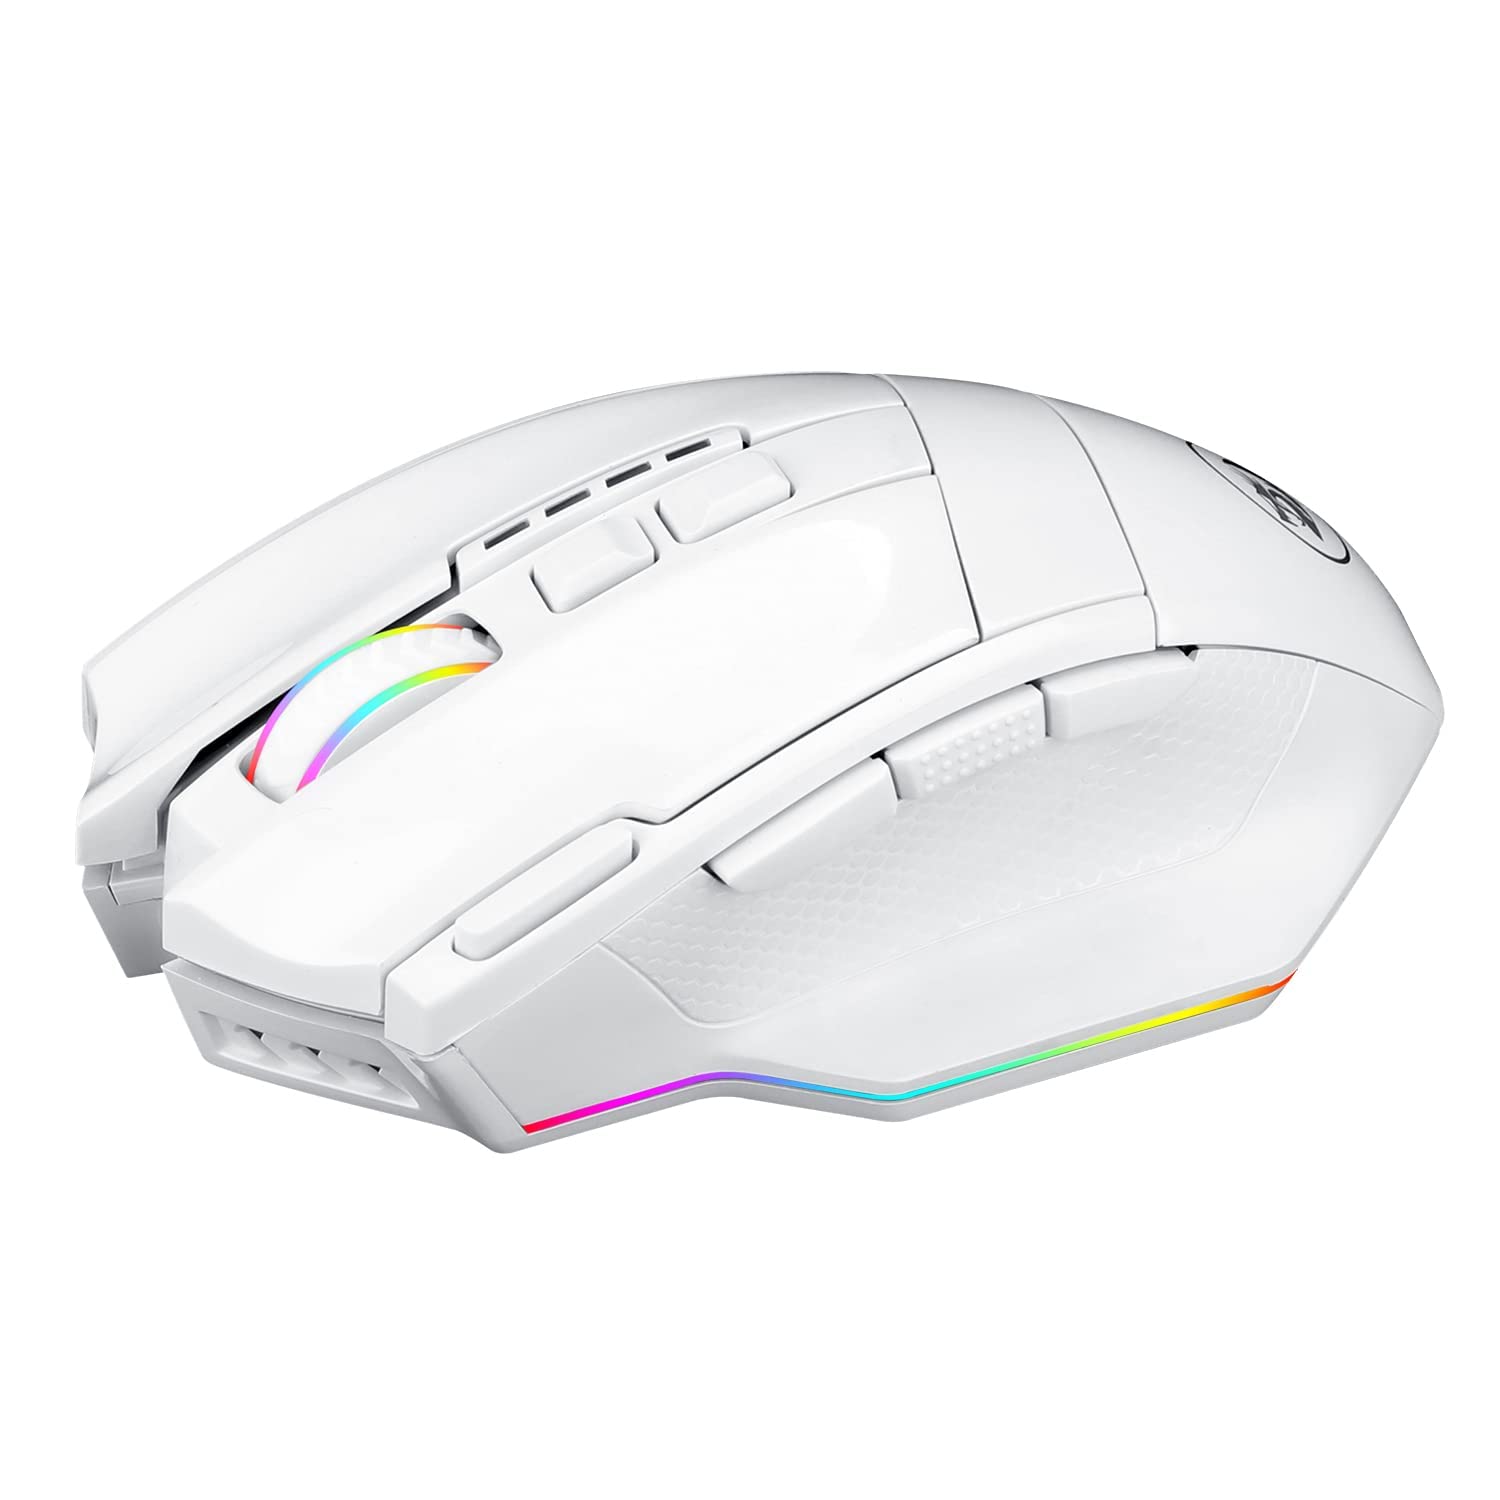 Redragon M801 Gaming Mouse LED RGB Backlit MMO 9 Programmable Buttons Mouse with Macro Recording Side Buttons Rapid Fire Button 16000 DPI for Windows PC Gamer (Wireless, White)